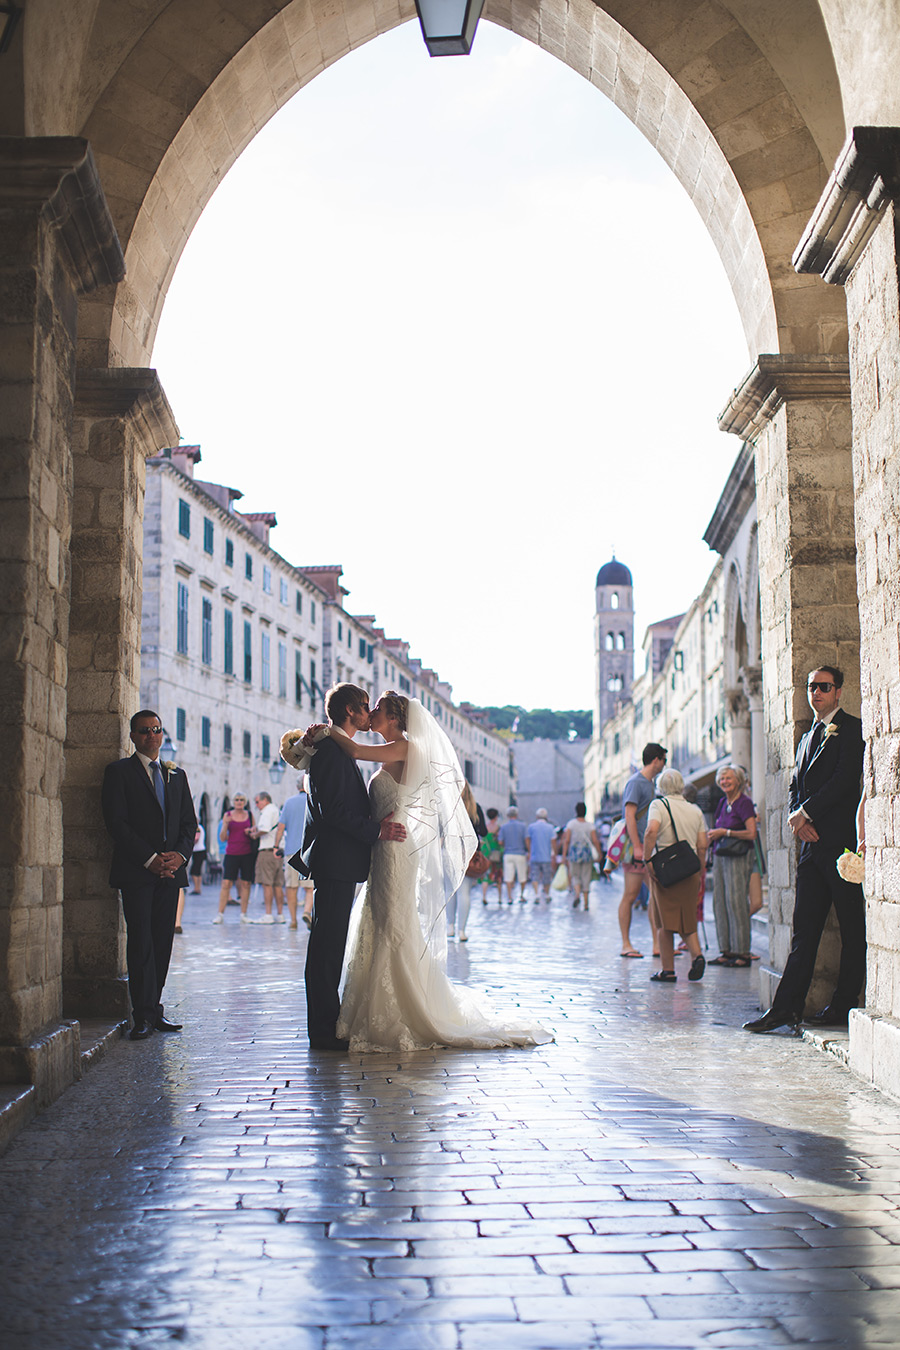 One of a set of images taken at this chic destination Wedding of Jenna & Nick. The stylish old town of Dubrovnik, Croatia.  The couple share a kiss.  Photography by Matt Porteous